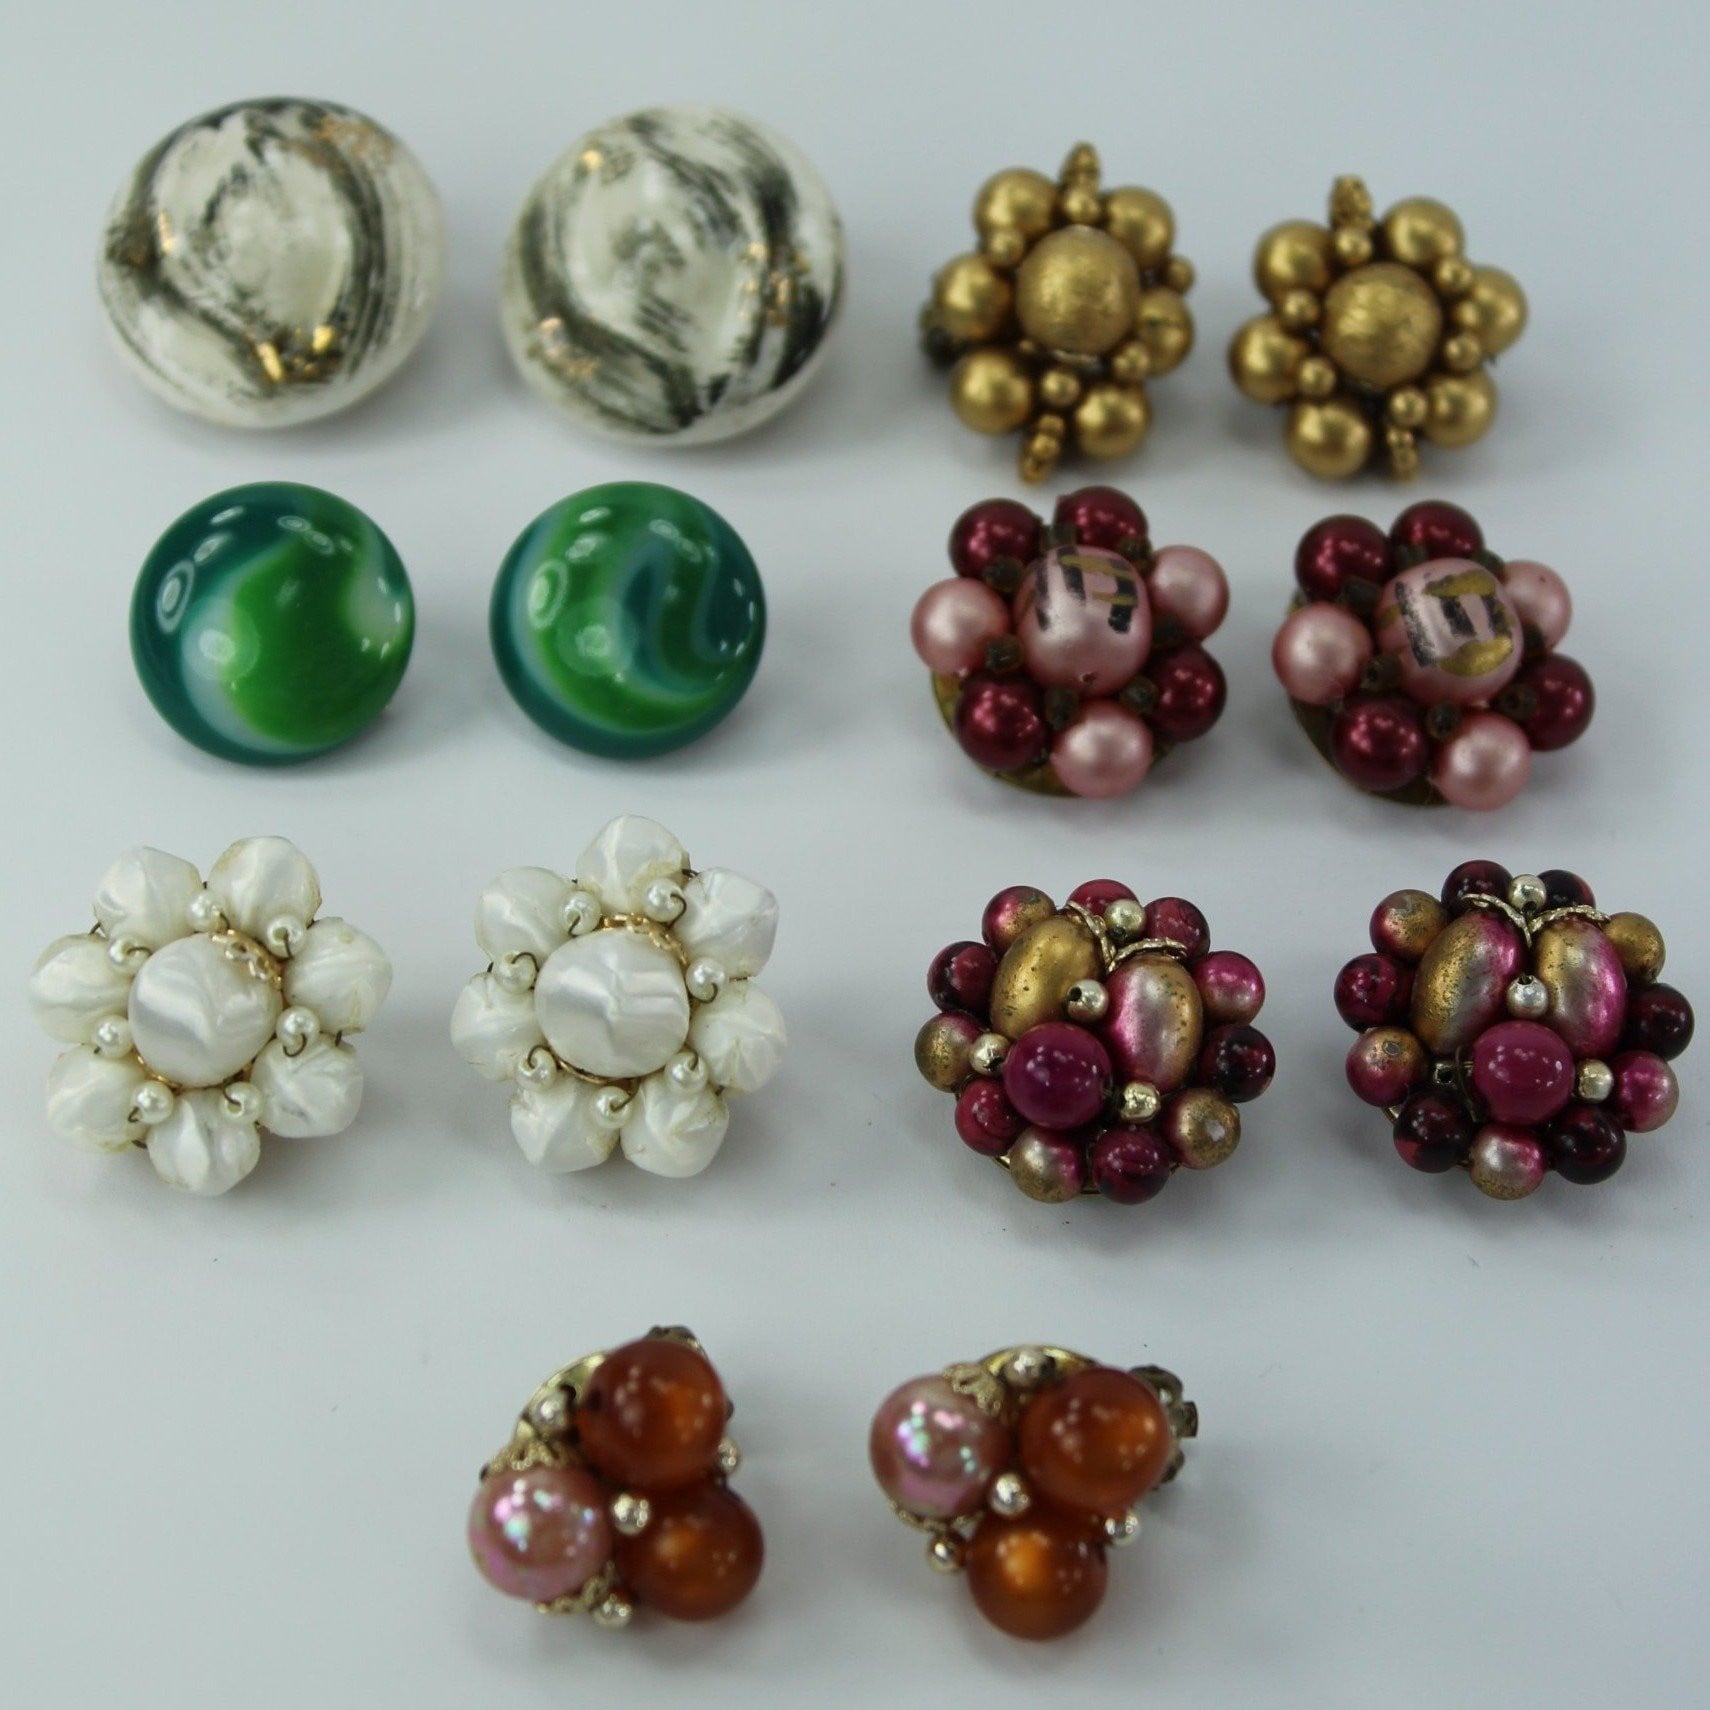 Vintage Earrings Clip Collection 7 Pairs Japan Hong Kong Bead Clusters Ceramic